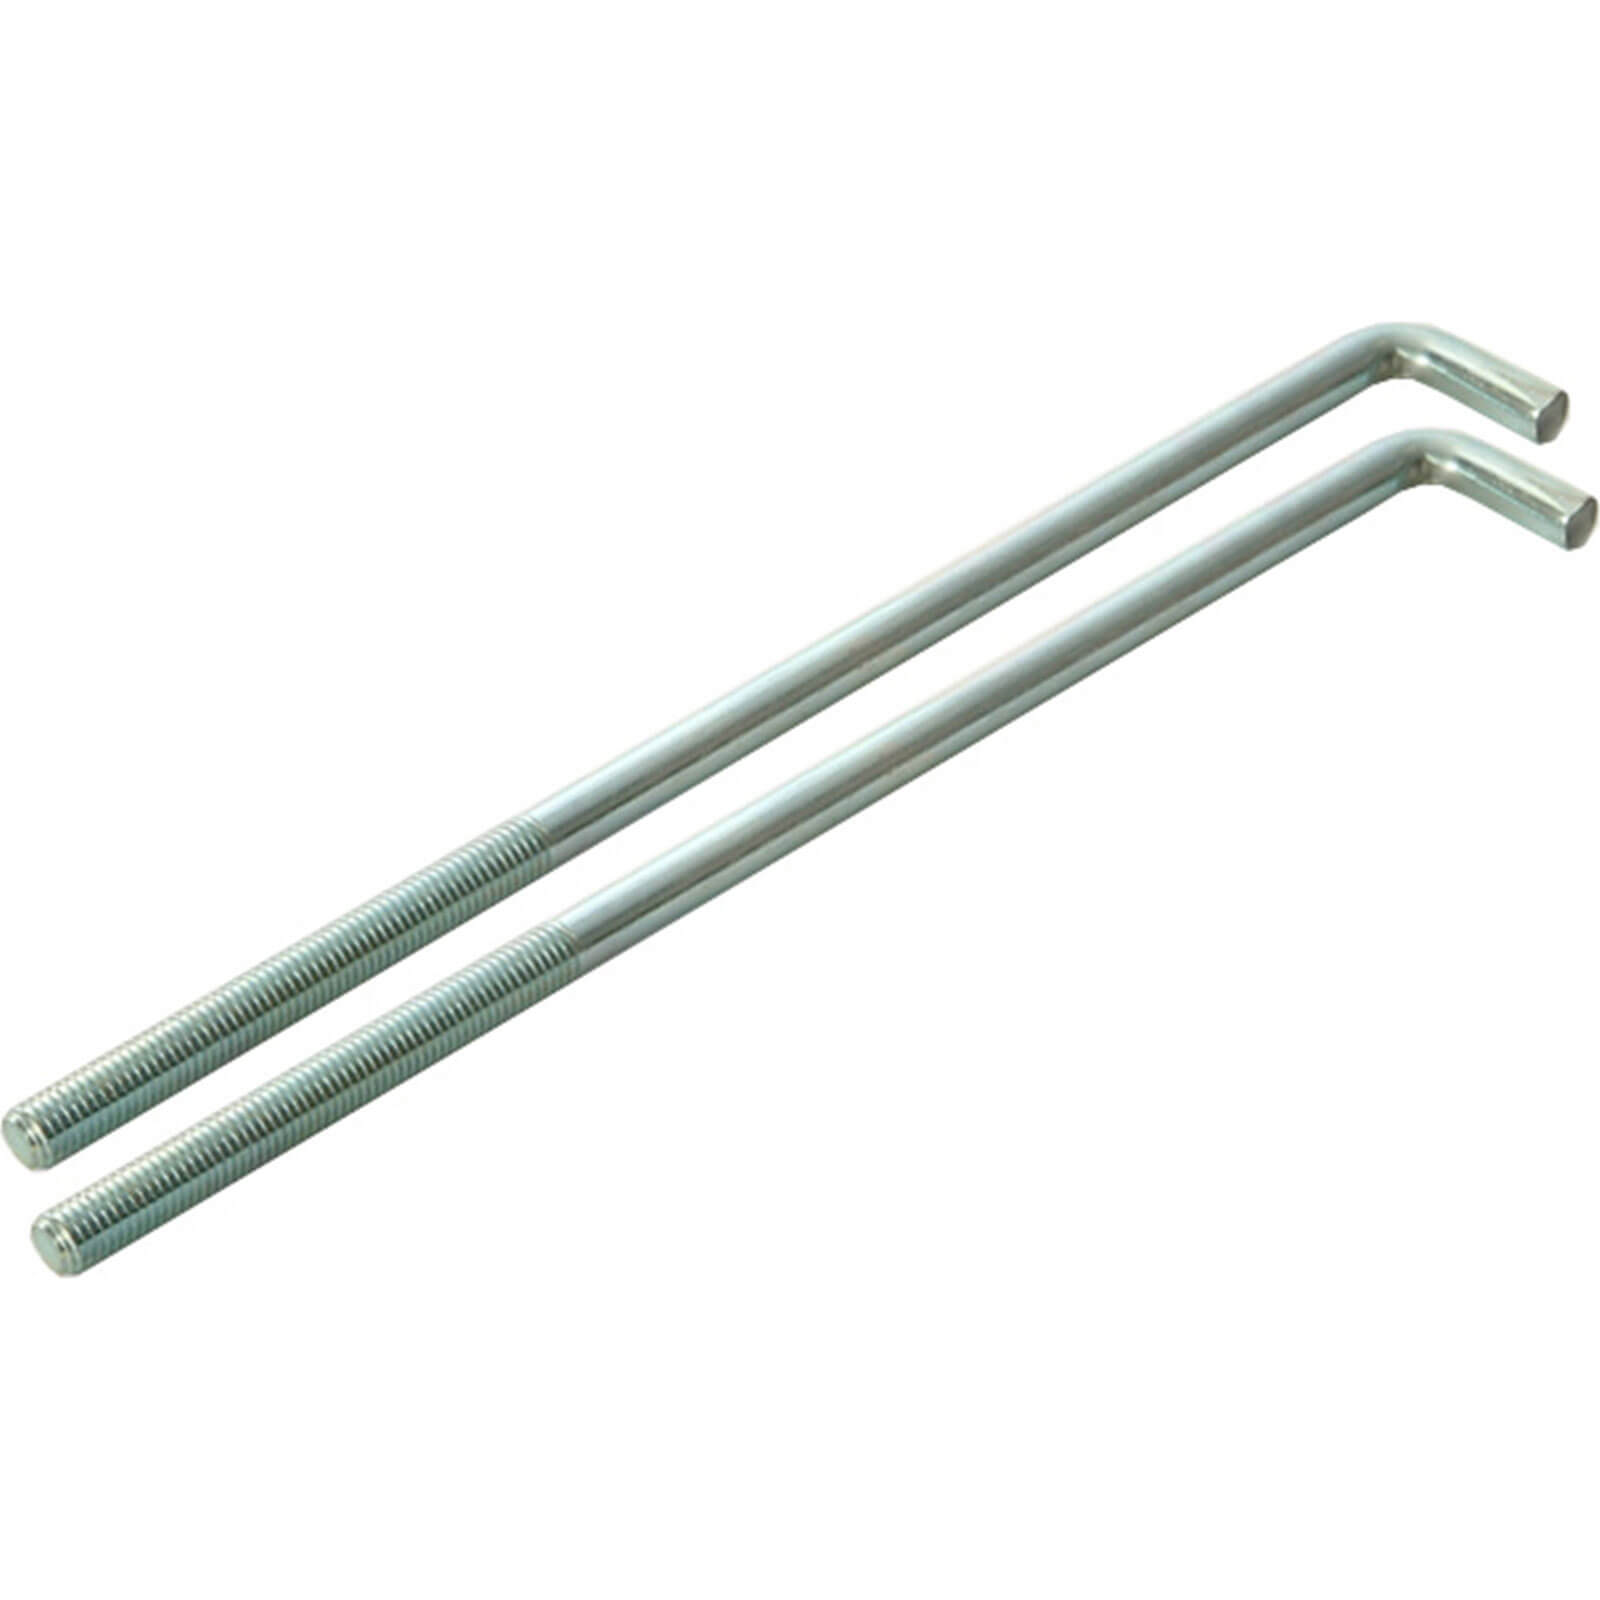 Image of Faithfull External Building Profile Bolts 350mm Pack of 2